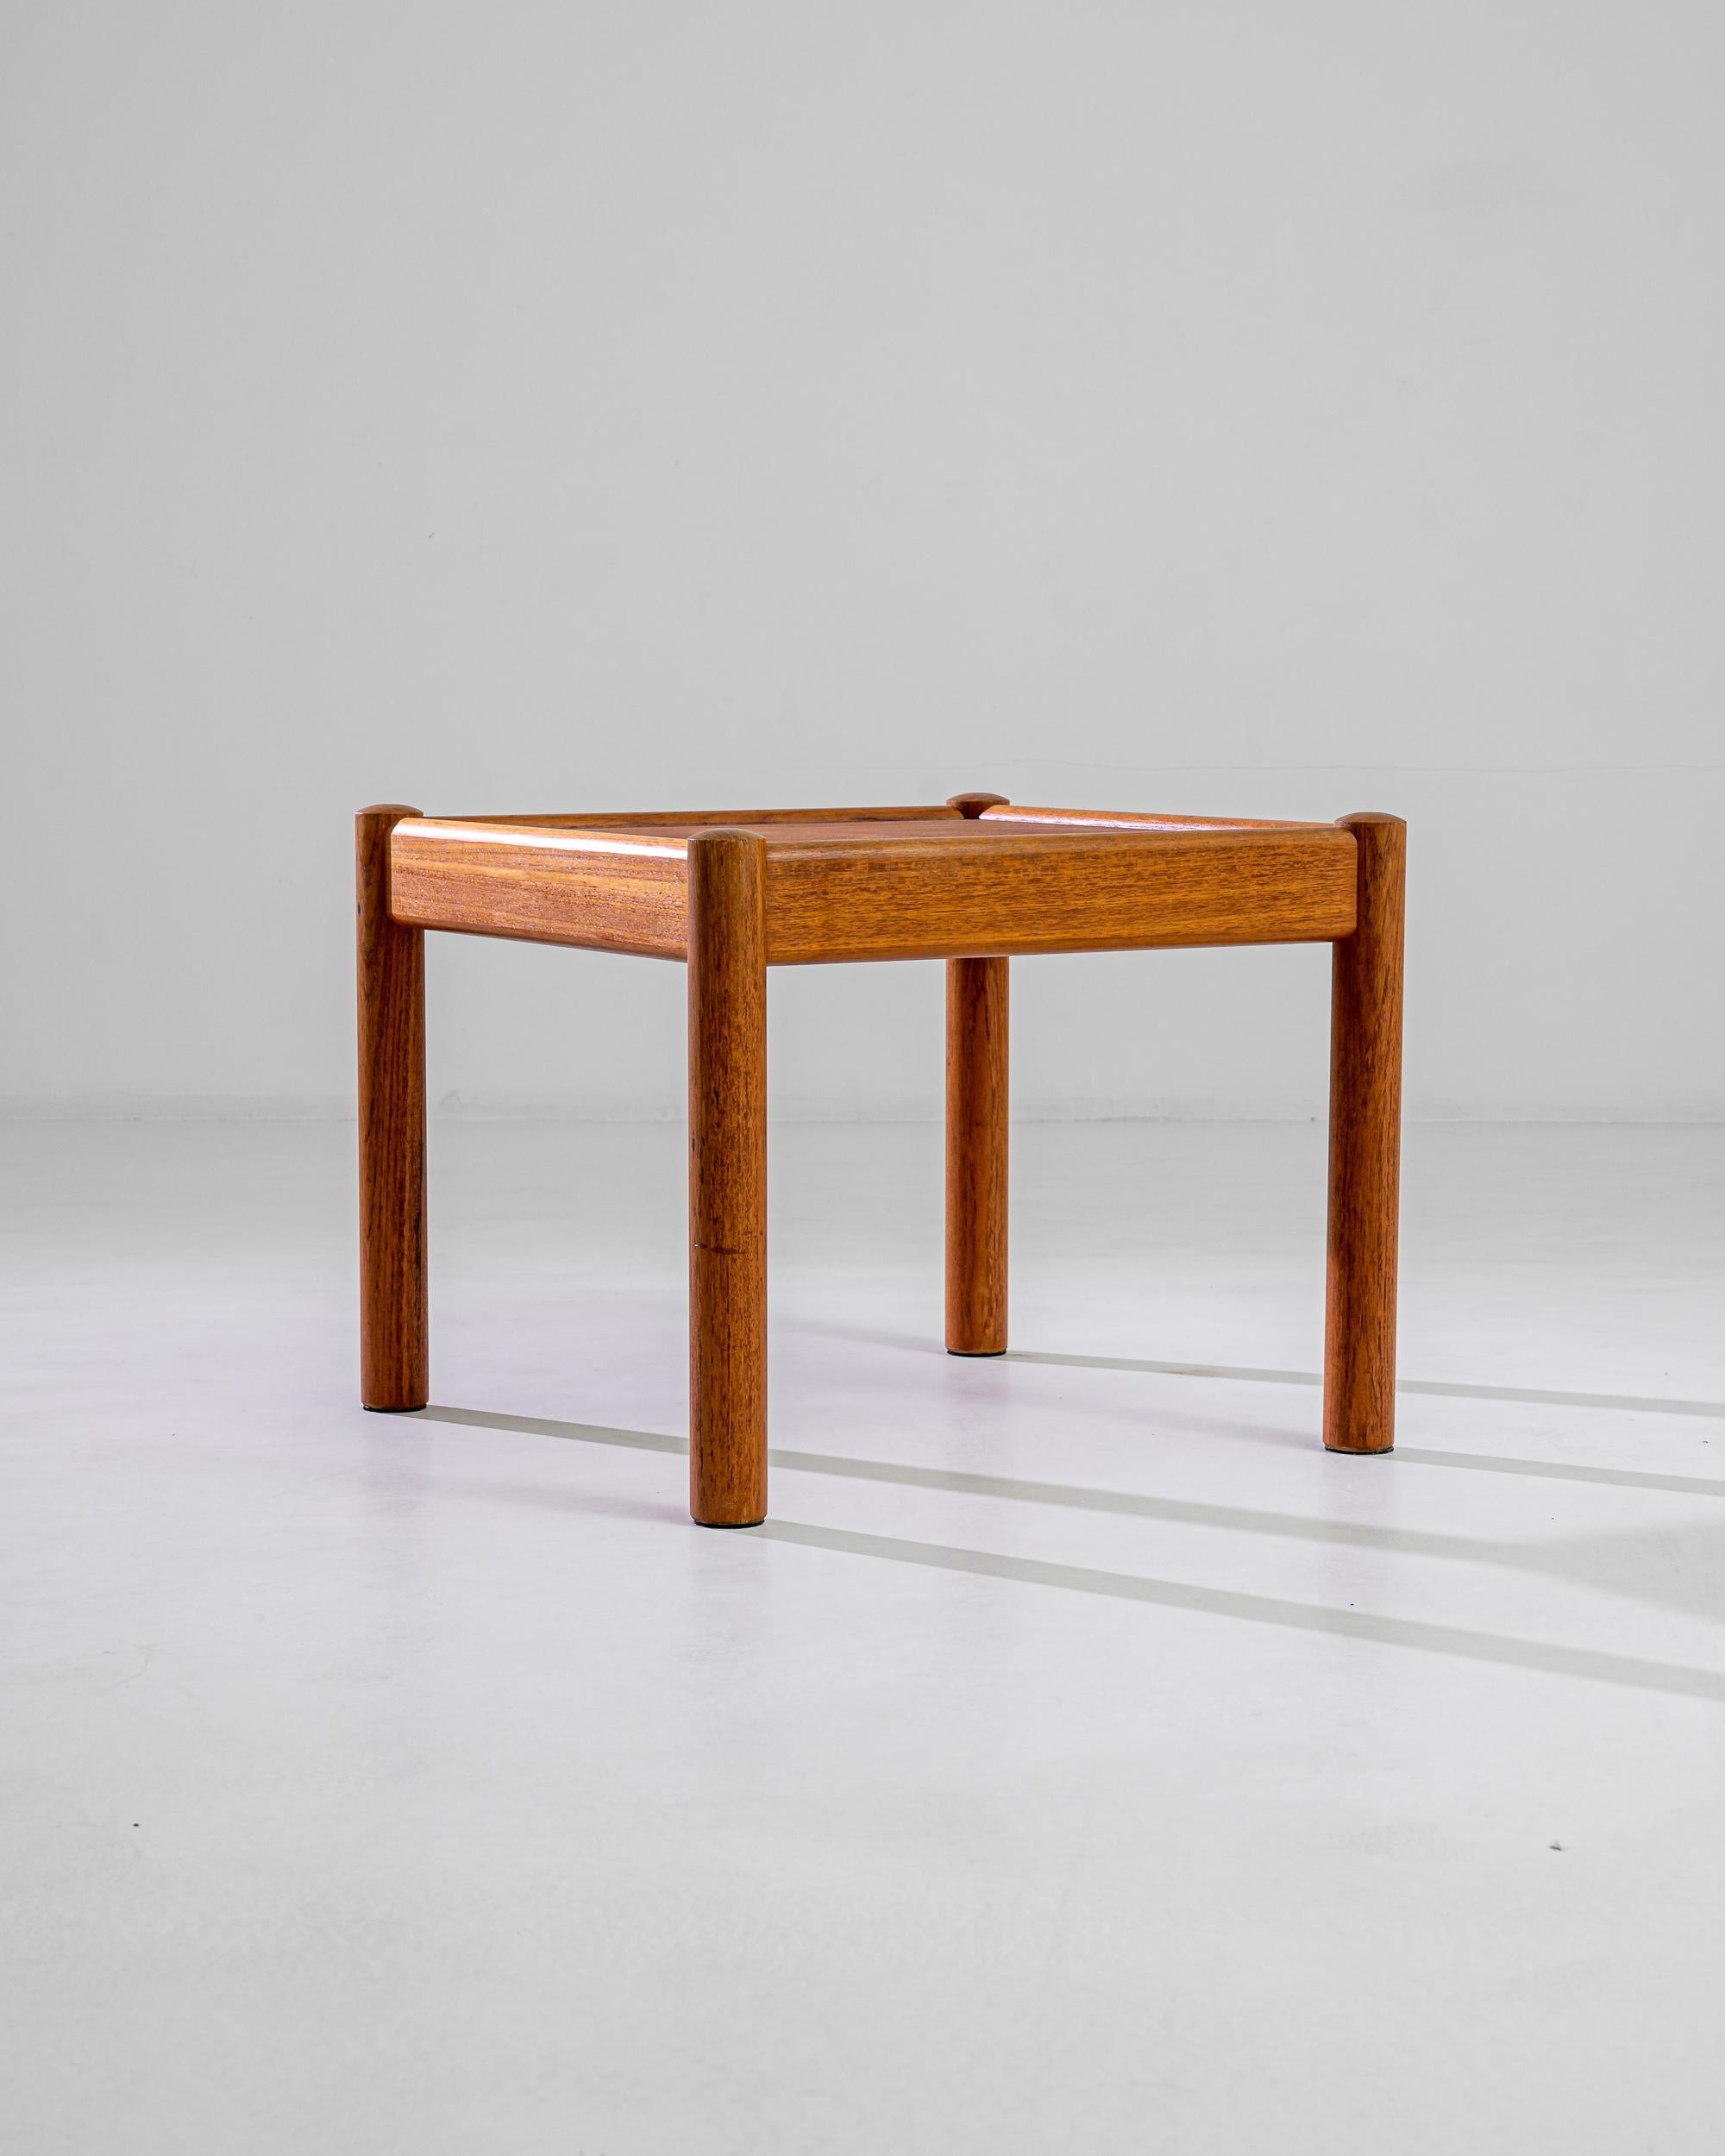 This minimalist Danish coffee table charms with the simple elegance of its outlines: sturdy round feet are attached to a sleek apron that frames the perfectly square table top in a natural way. The tawny hue of the teak endows this 20th century